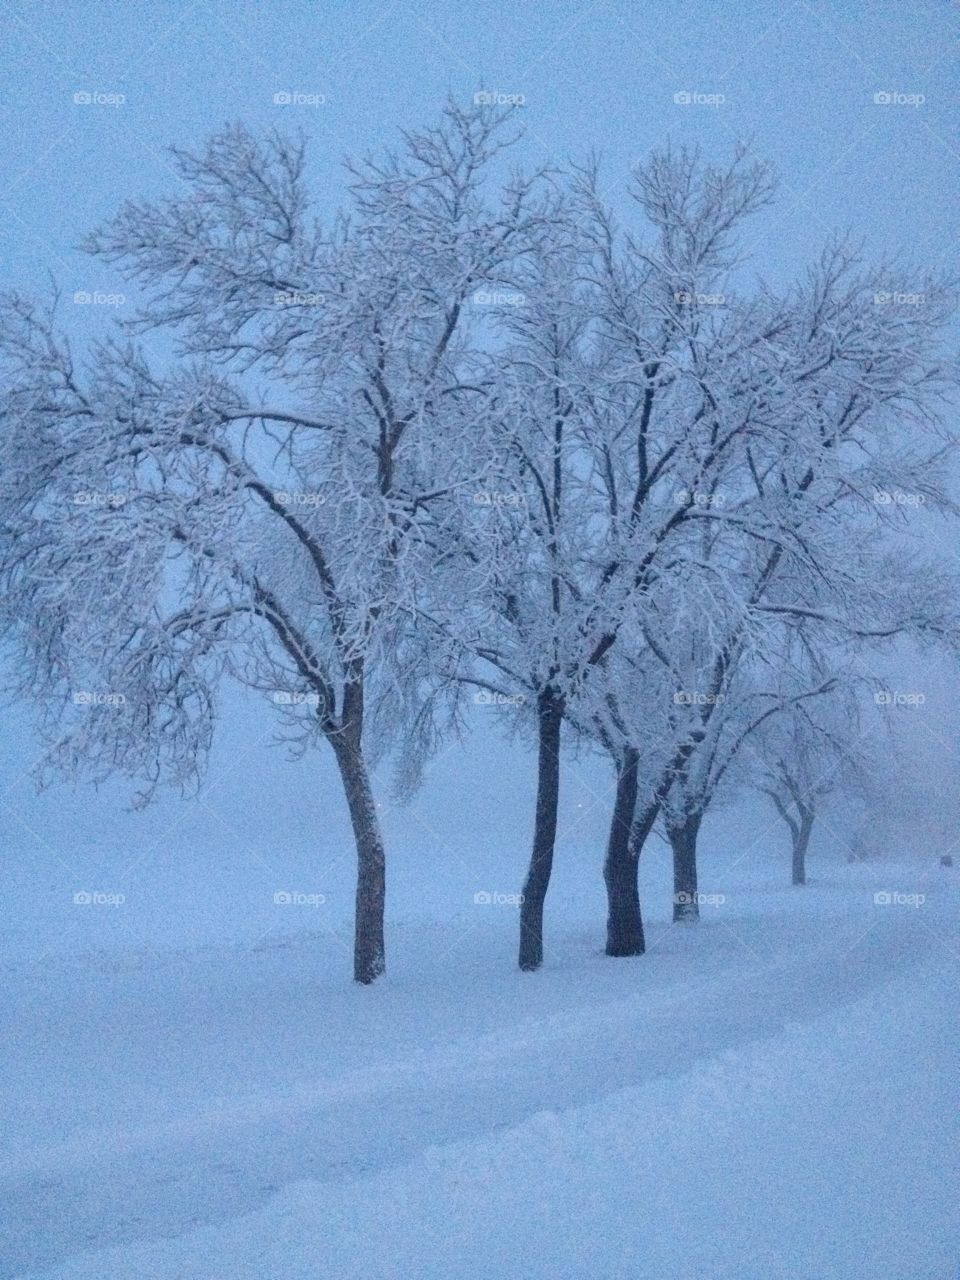 Trees in winter. Snowy evening in the park